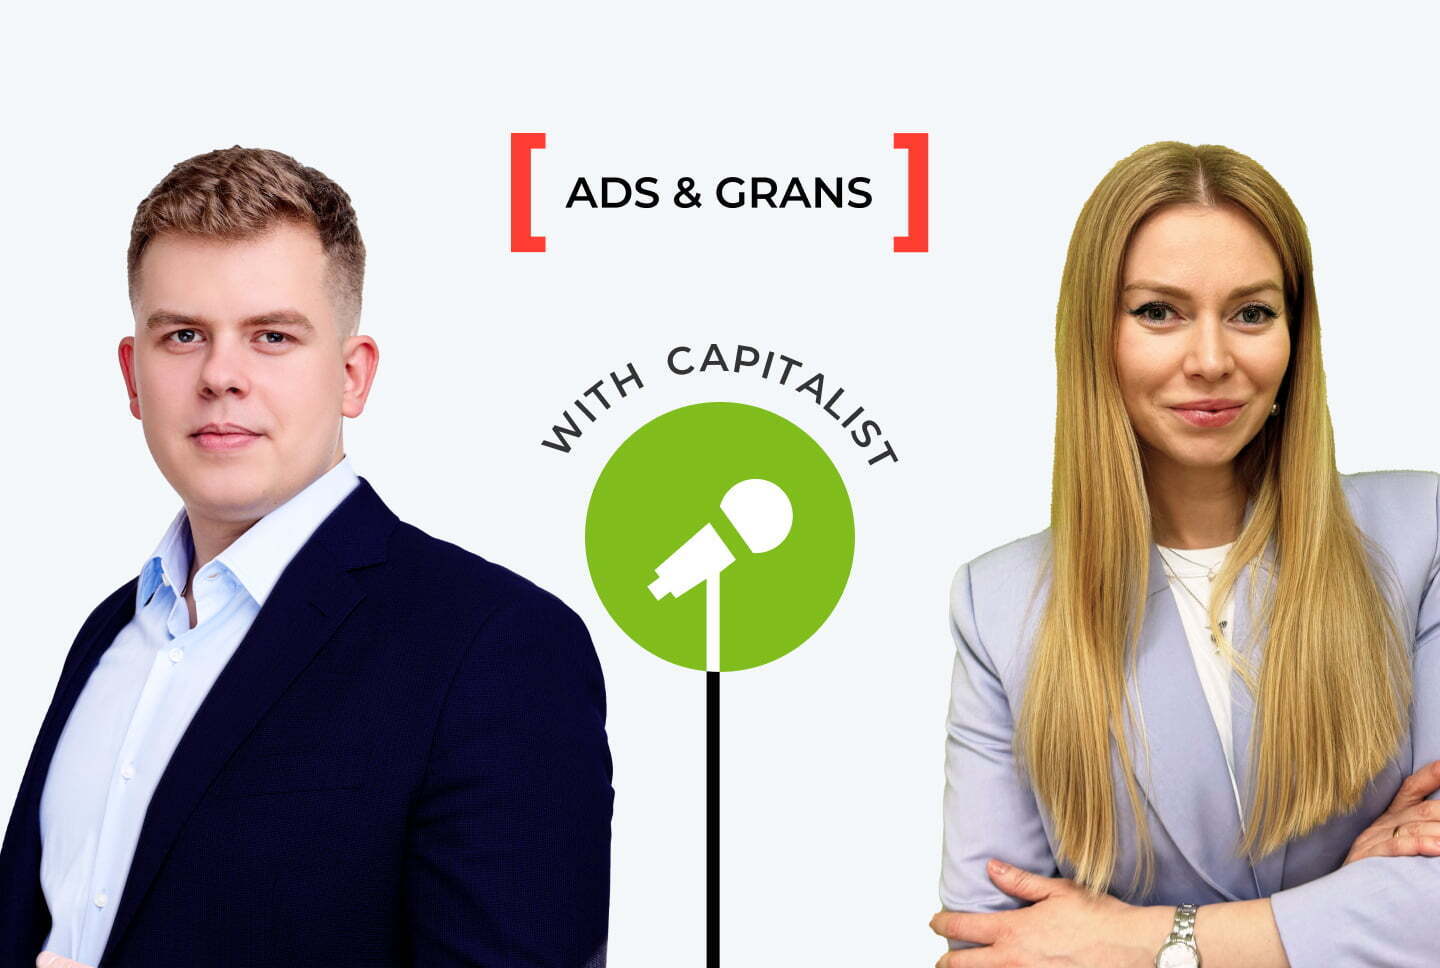 Daria from Capitalist payment service interview by RichAds ad network